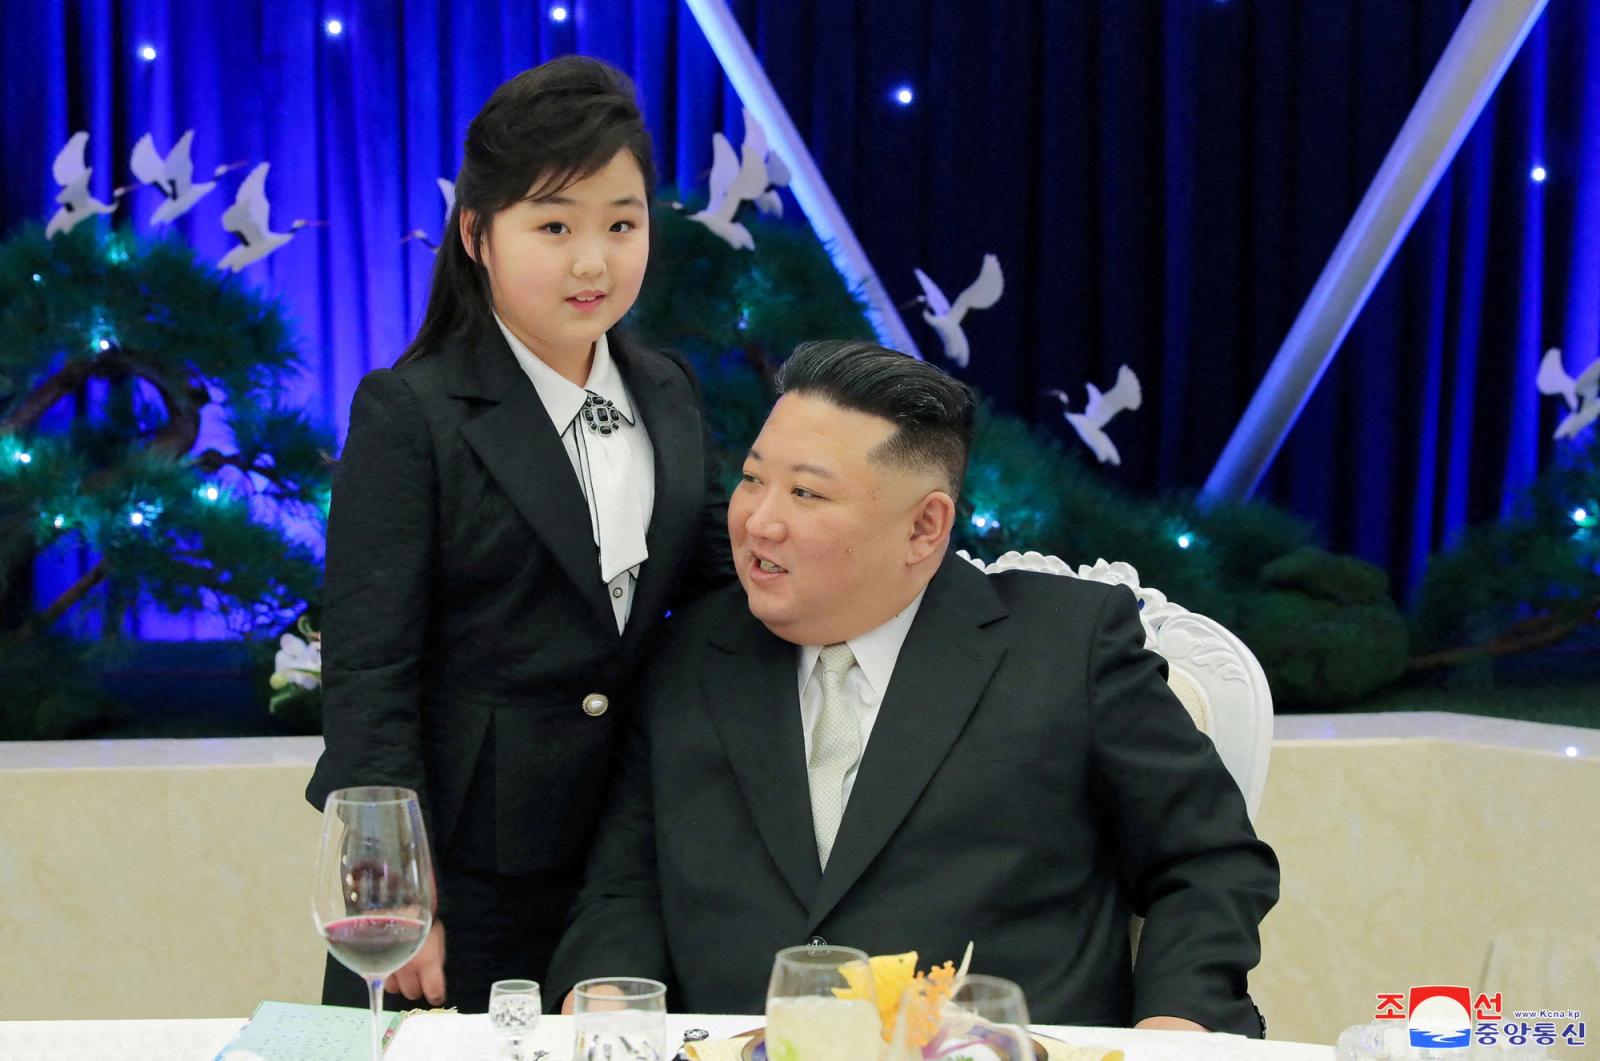 North Korean leader Kim Jong Un talks with his daughter Kim Ju Ae at a banquet to celebrate the 75th anniversary of the Korean People's Army the following day, in Pyongyang, North Korea February 7, 2023